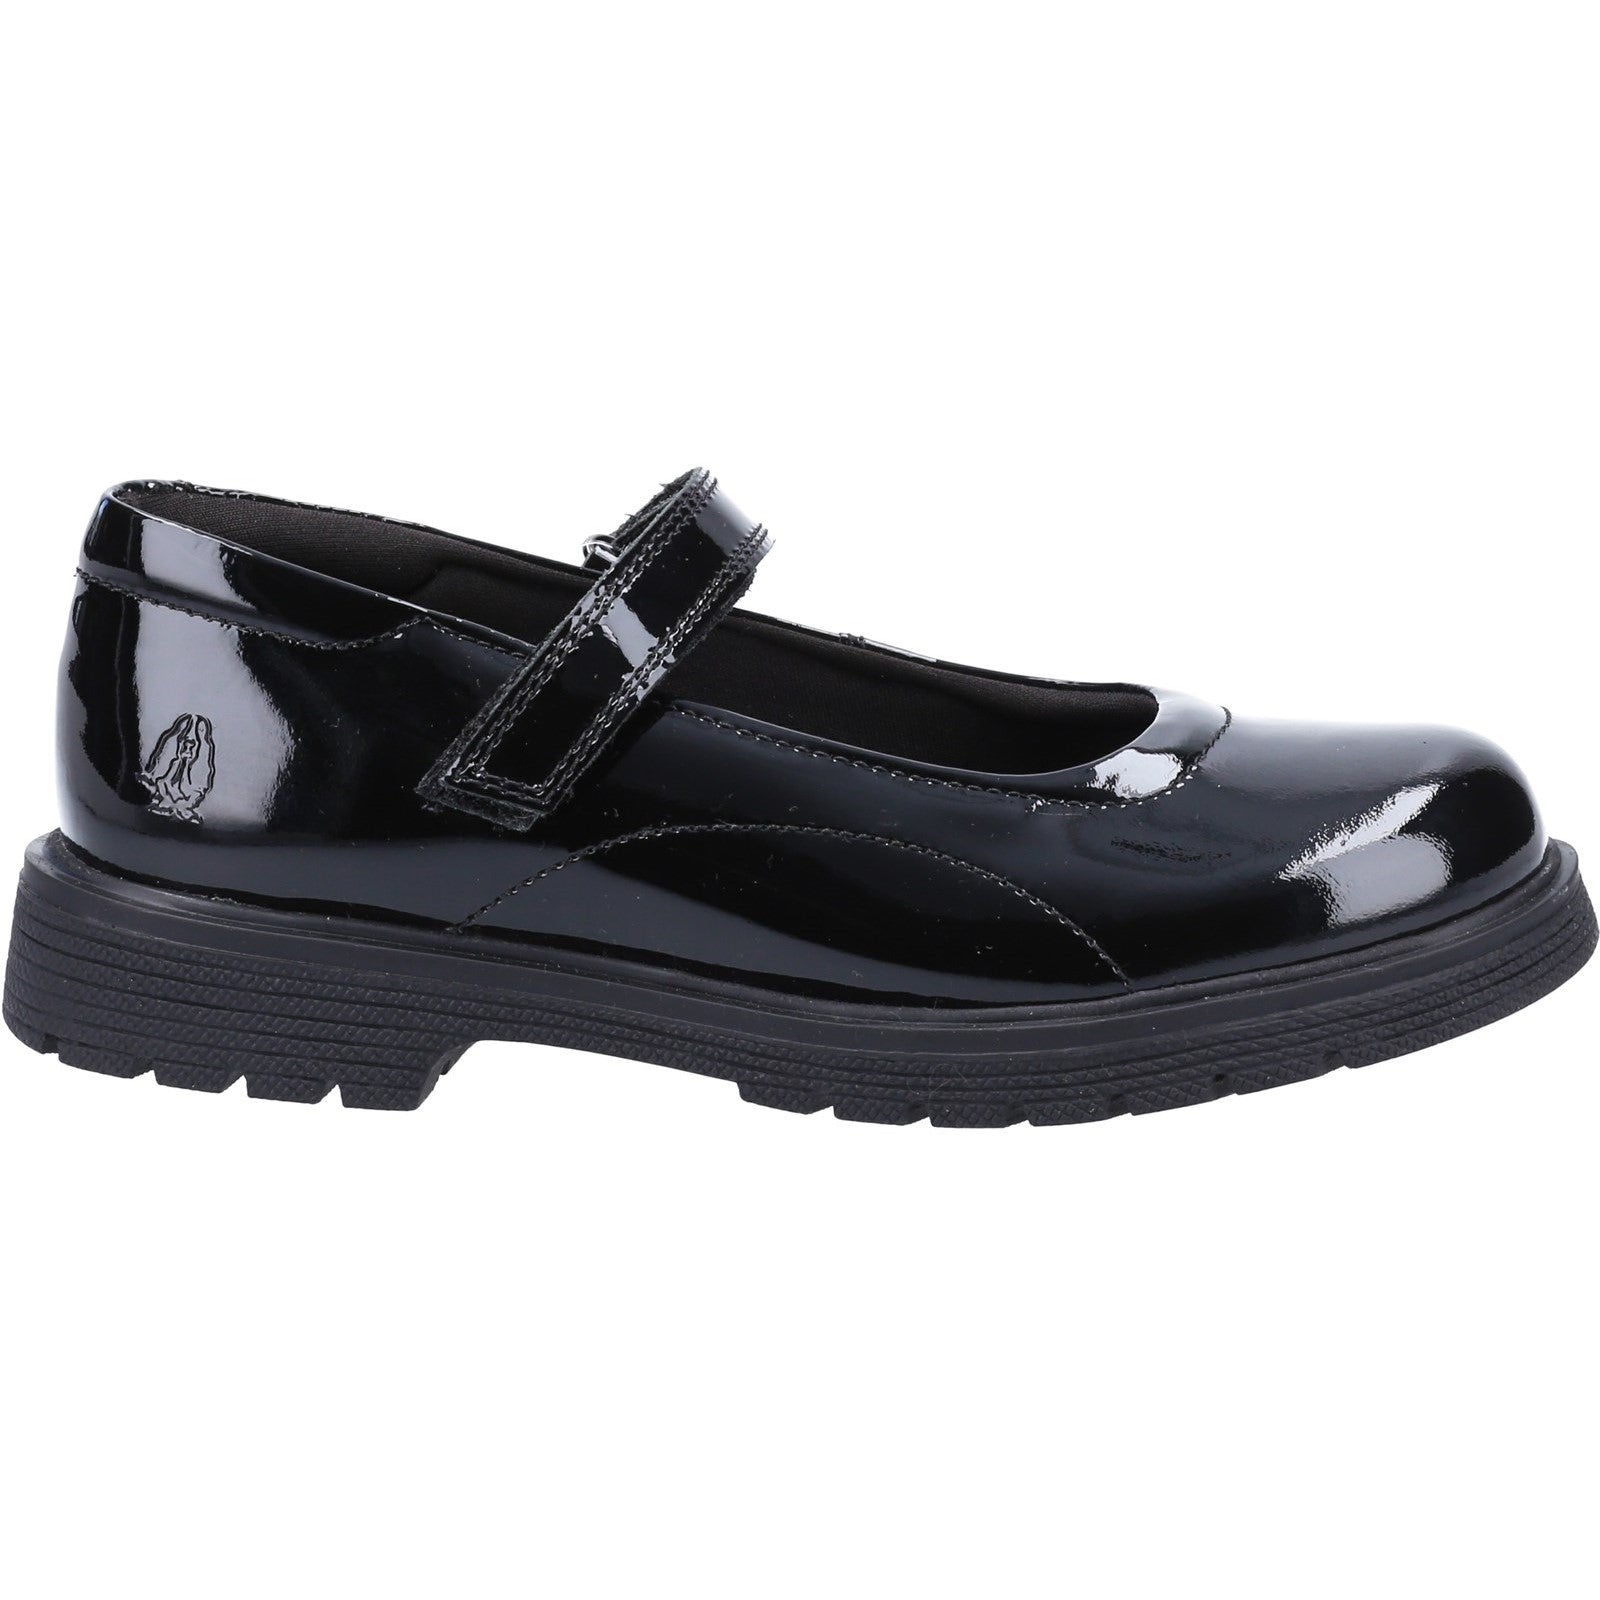 Hush Puppies Girls Tally Patent Leather School Shoes - Black